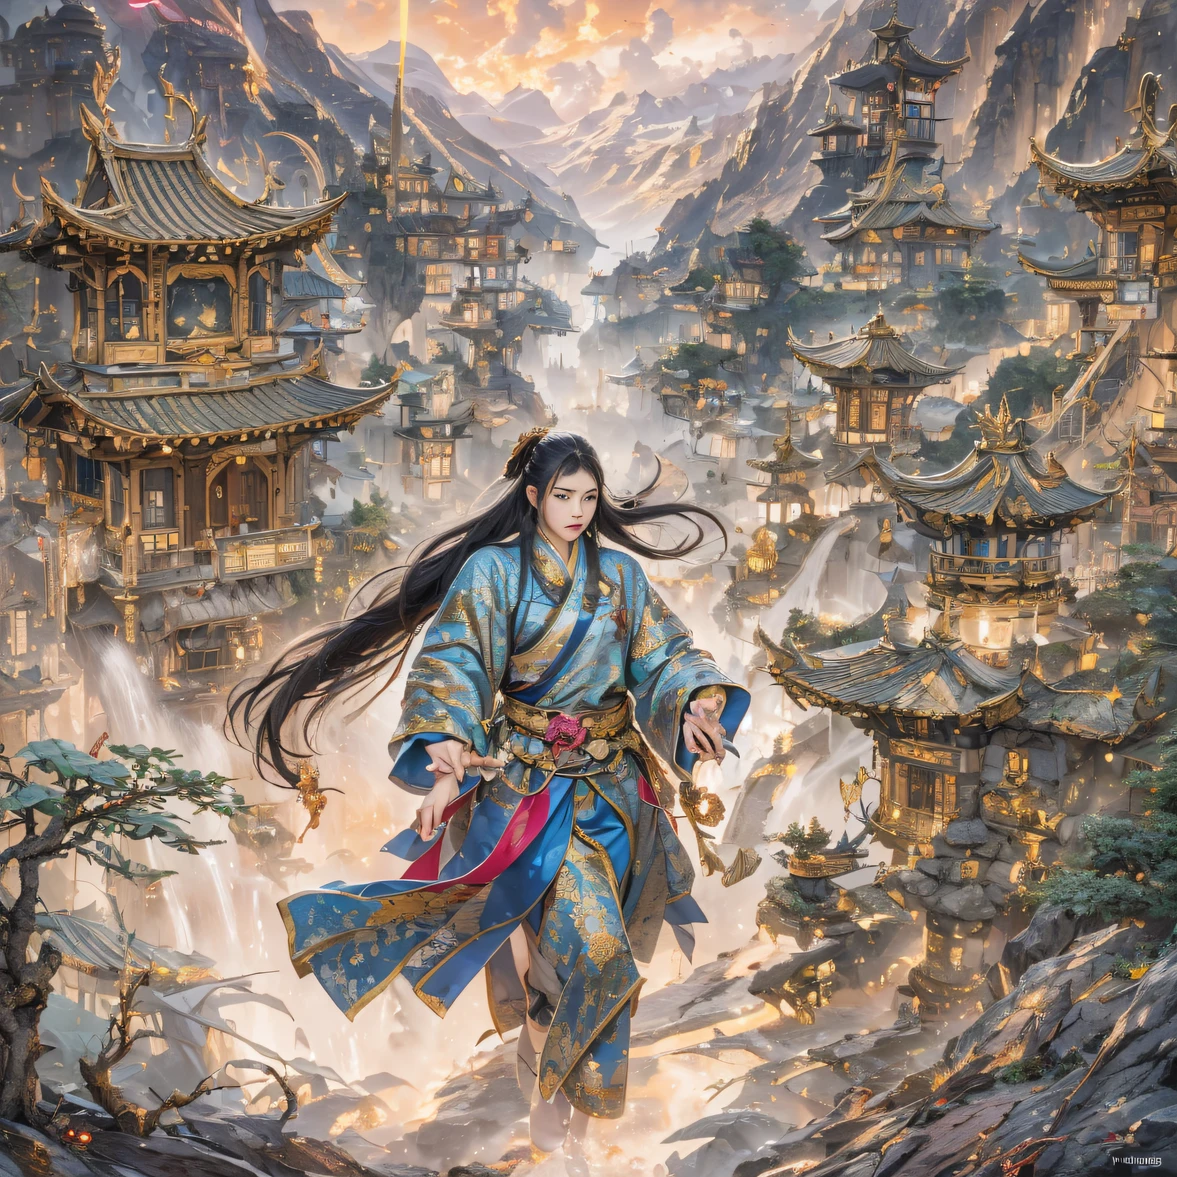 Fly into the fairy realm, Chance encounter with Liu Hanshu, He saw in him his former self, It was decided to take him as an apprentice, Teach him how to protect himself, But because of the Tibetan star map, He established relationships with the Liu family and the Jade Sword Sect, It opens with the death of Liu Hanshu, Qin Yu embarked on the road of confrontation with a strong enemy, Working hard, Make yourself stronger, Stick to your own core path of justice, I also want to protect the people I care about, The three brothers took off, And embarked on a long journey to find a good brother, Qin Yu, Where are Xiao Hei and Hou Fei（canyons）Climb the streets（Doomsday Stream）eyes filled with angry，He clenched his fists，Rush up，Deliver a fatal blow to your opponent，full bodyesbian，Full Body Male Mage 32K（Masterpiece Canyon Ultra HD）Long flowing black hair，Campsite size，zydink， The wounded lined up in the streets（canyons）Climb the streets， The scene of the explosion（canyons）， （Linen batik scarf）， Angry fighting stance， looking at the ground， Batik linen bandana， Chinese python pattern long-sleeved garment， canyons（Abstract propylene splash：1.2）， Dark clouds lightning background，Flour flies（realisticlying：1.4），Black color hair，Flour fluttering，rainbow background， A high resolution， the detail， RAW photogr， Sharp Re， Nikon D850 Film Stock Photo by Jefferies Lee 4 Kodak Portra 400 Camera F1.6 shots, Rich colors, ultra-realistic vivid textures, Dramatic lighting, Unreal Engine Art Station Trend, cinestir 800，Flowing black hair,（（（Jungle Canyon）））The wounded lined up in the streets（vale）Climb the streetovie master real-time image quality